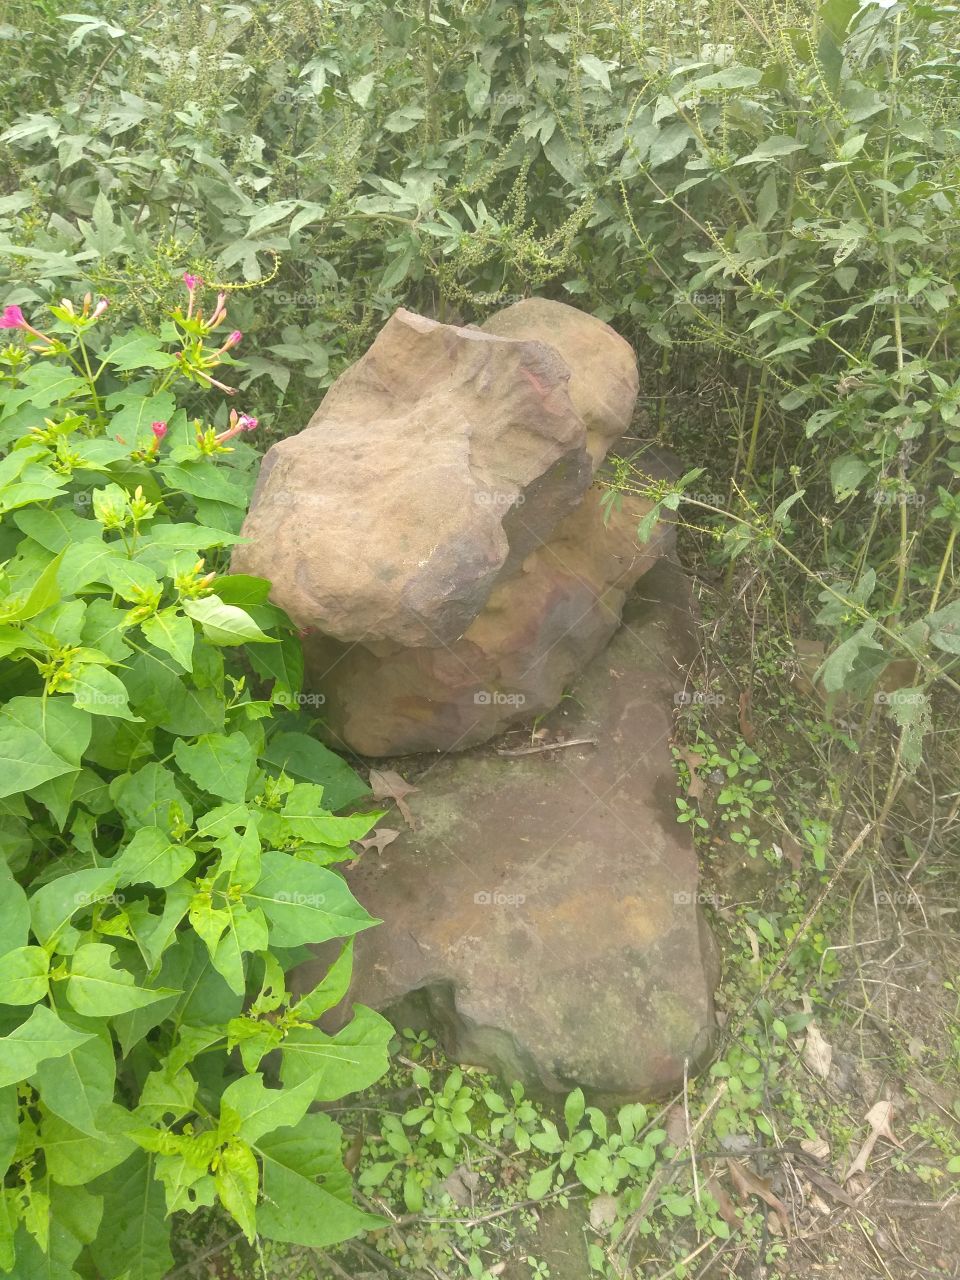 rocks from a place we called Rocky point there very beautiful and fit very well together